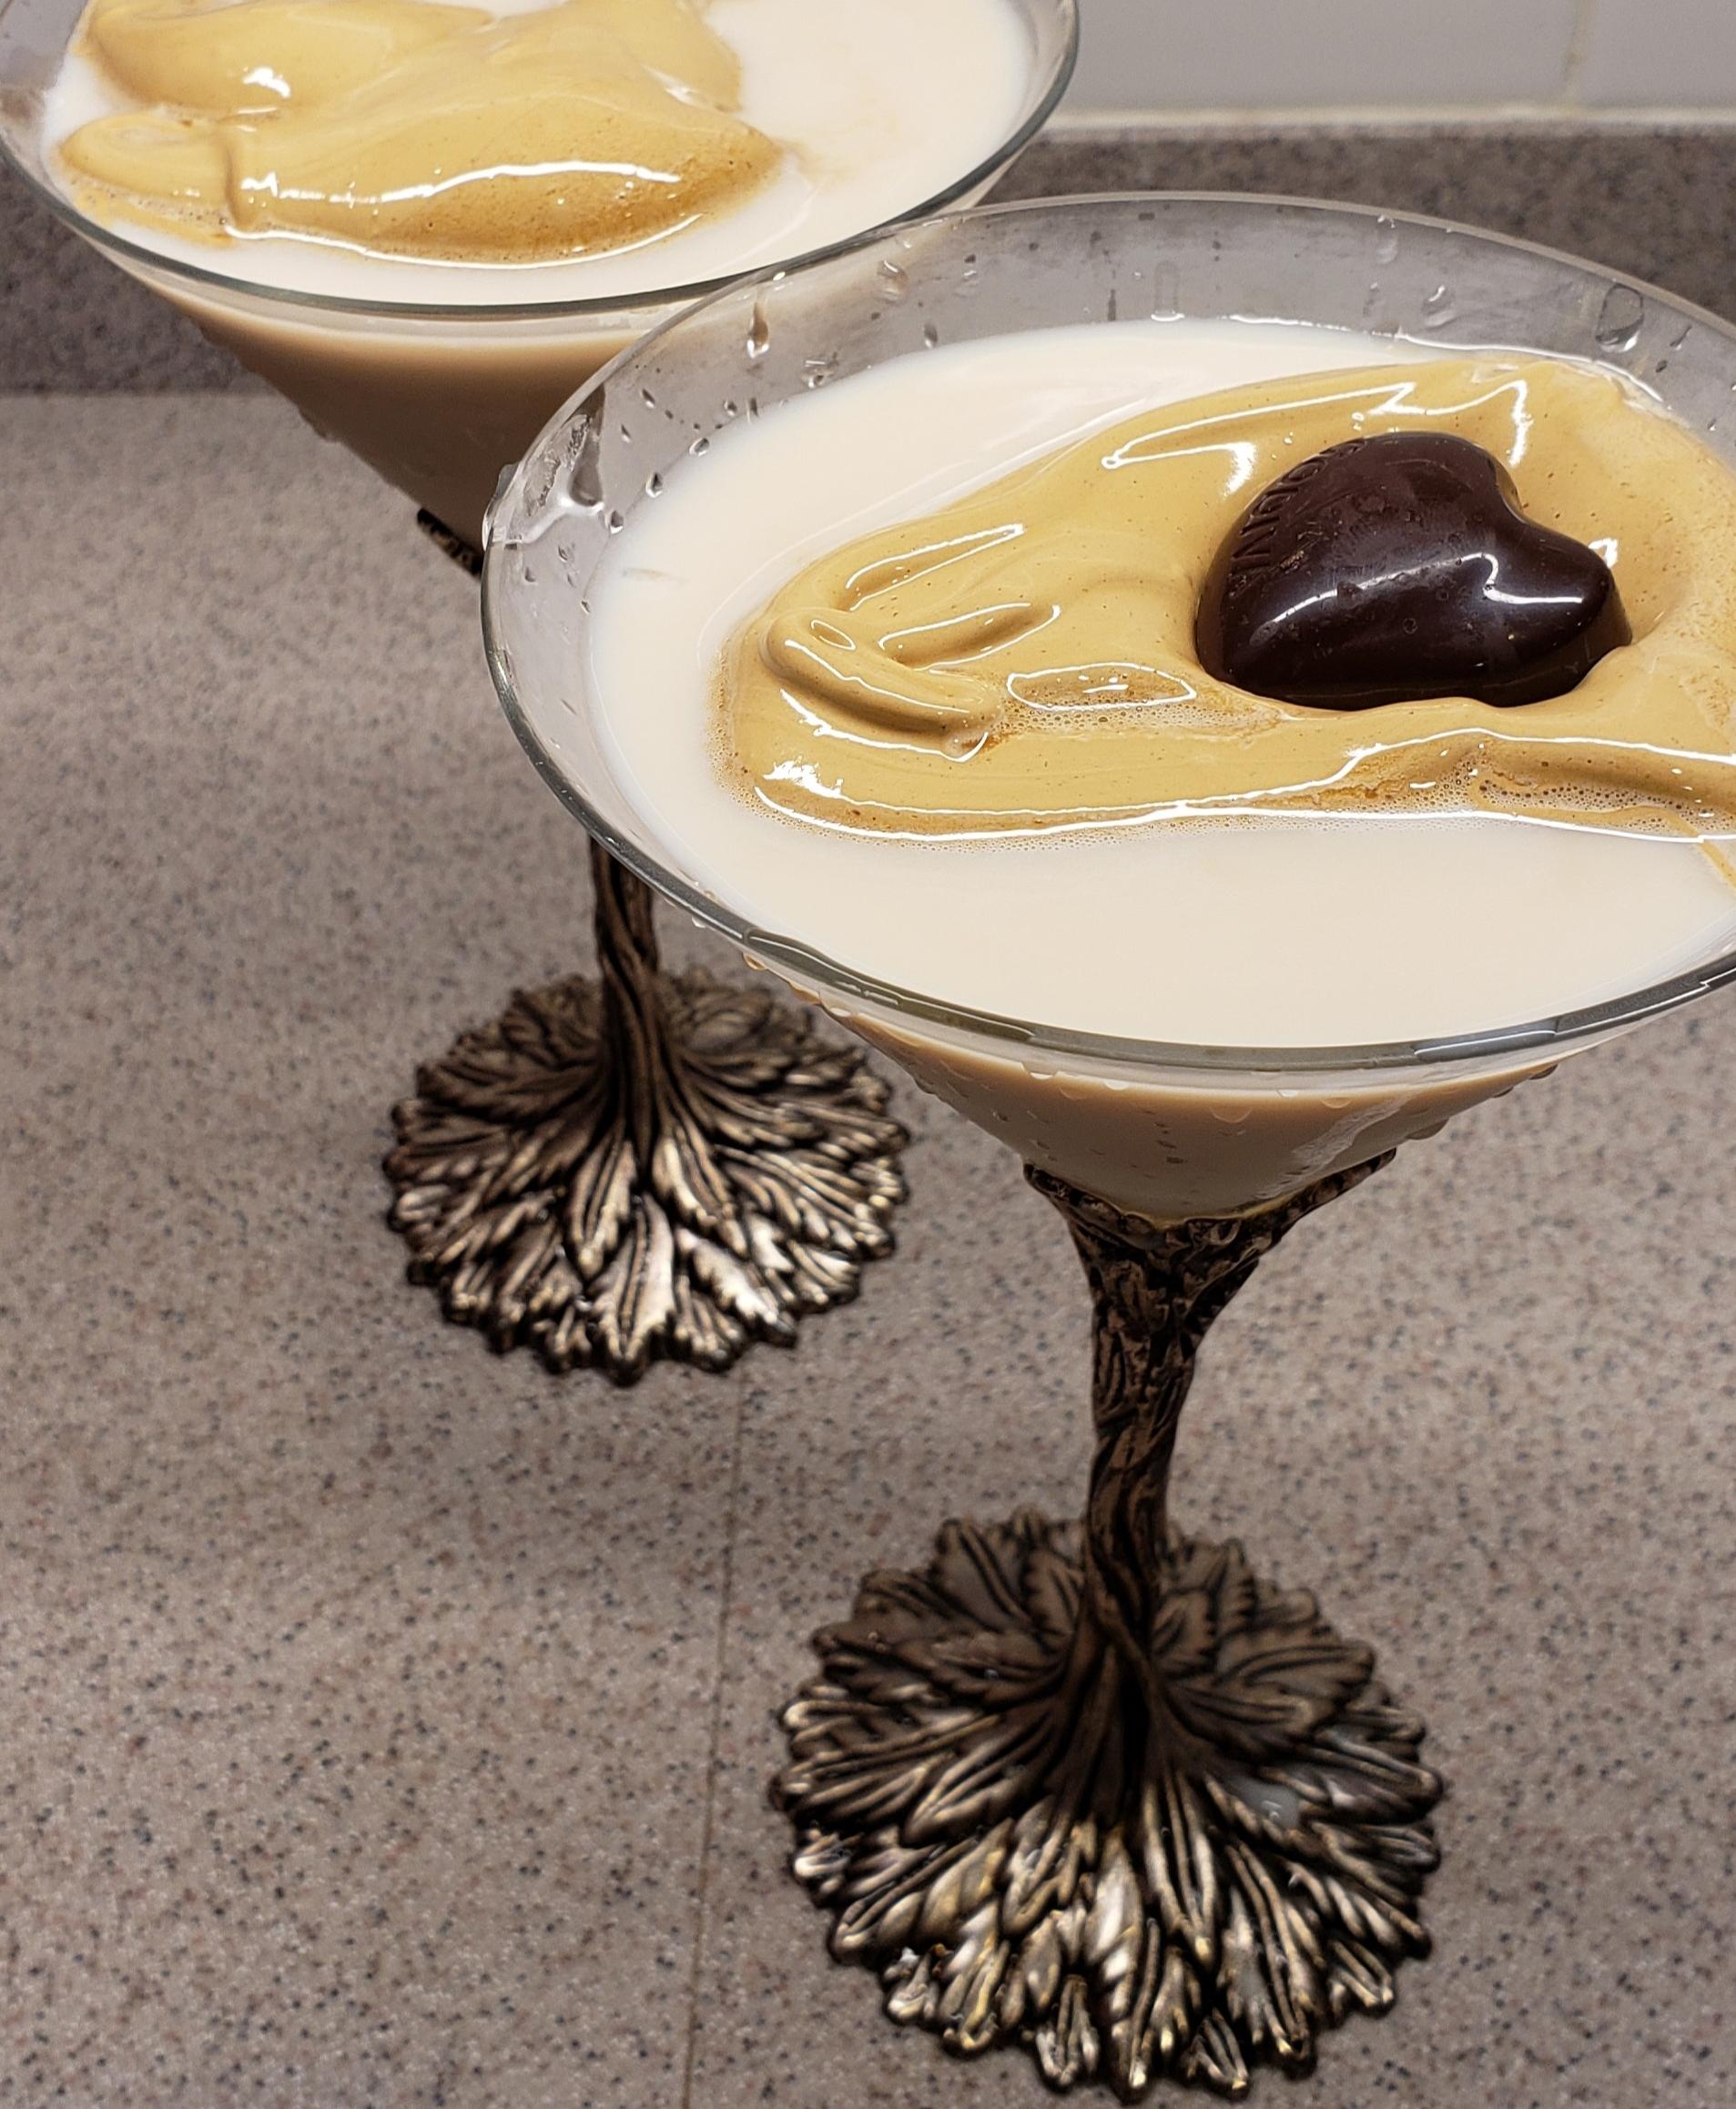  Satisfy your sweet tooth with a coffee martini that’s as delicious as it is beautiful.